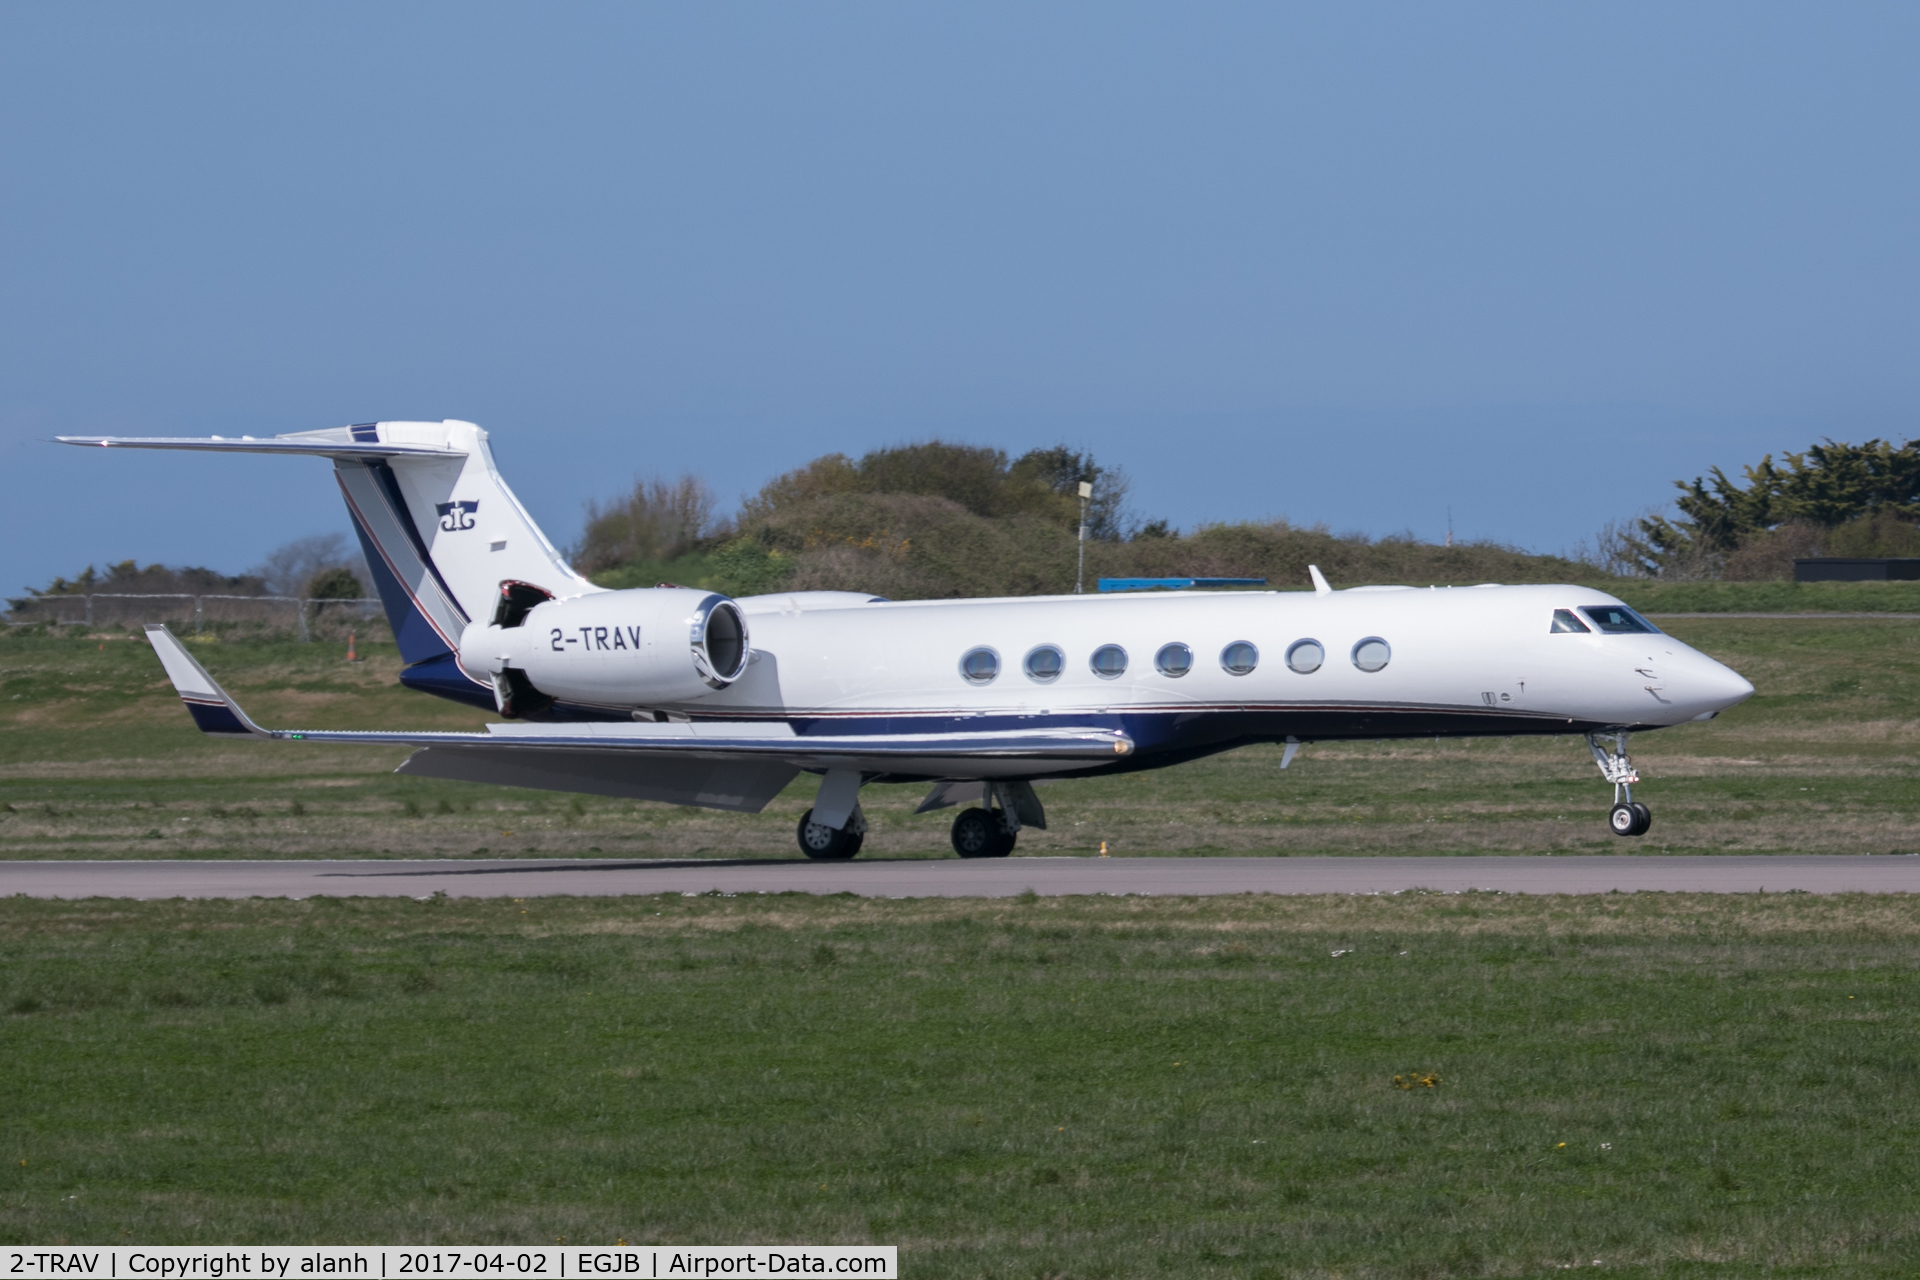 2-TRAV, 2013 Gulfstream Aerospace GV-SP (G550) C/N 5452, Rolling out after arrival at Guernsey from Knock